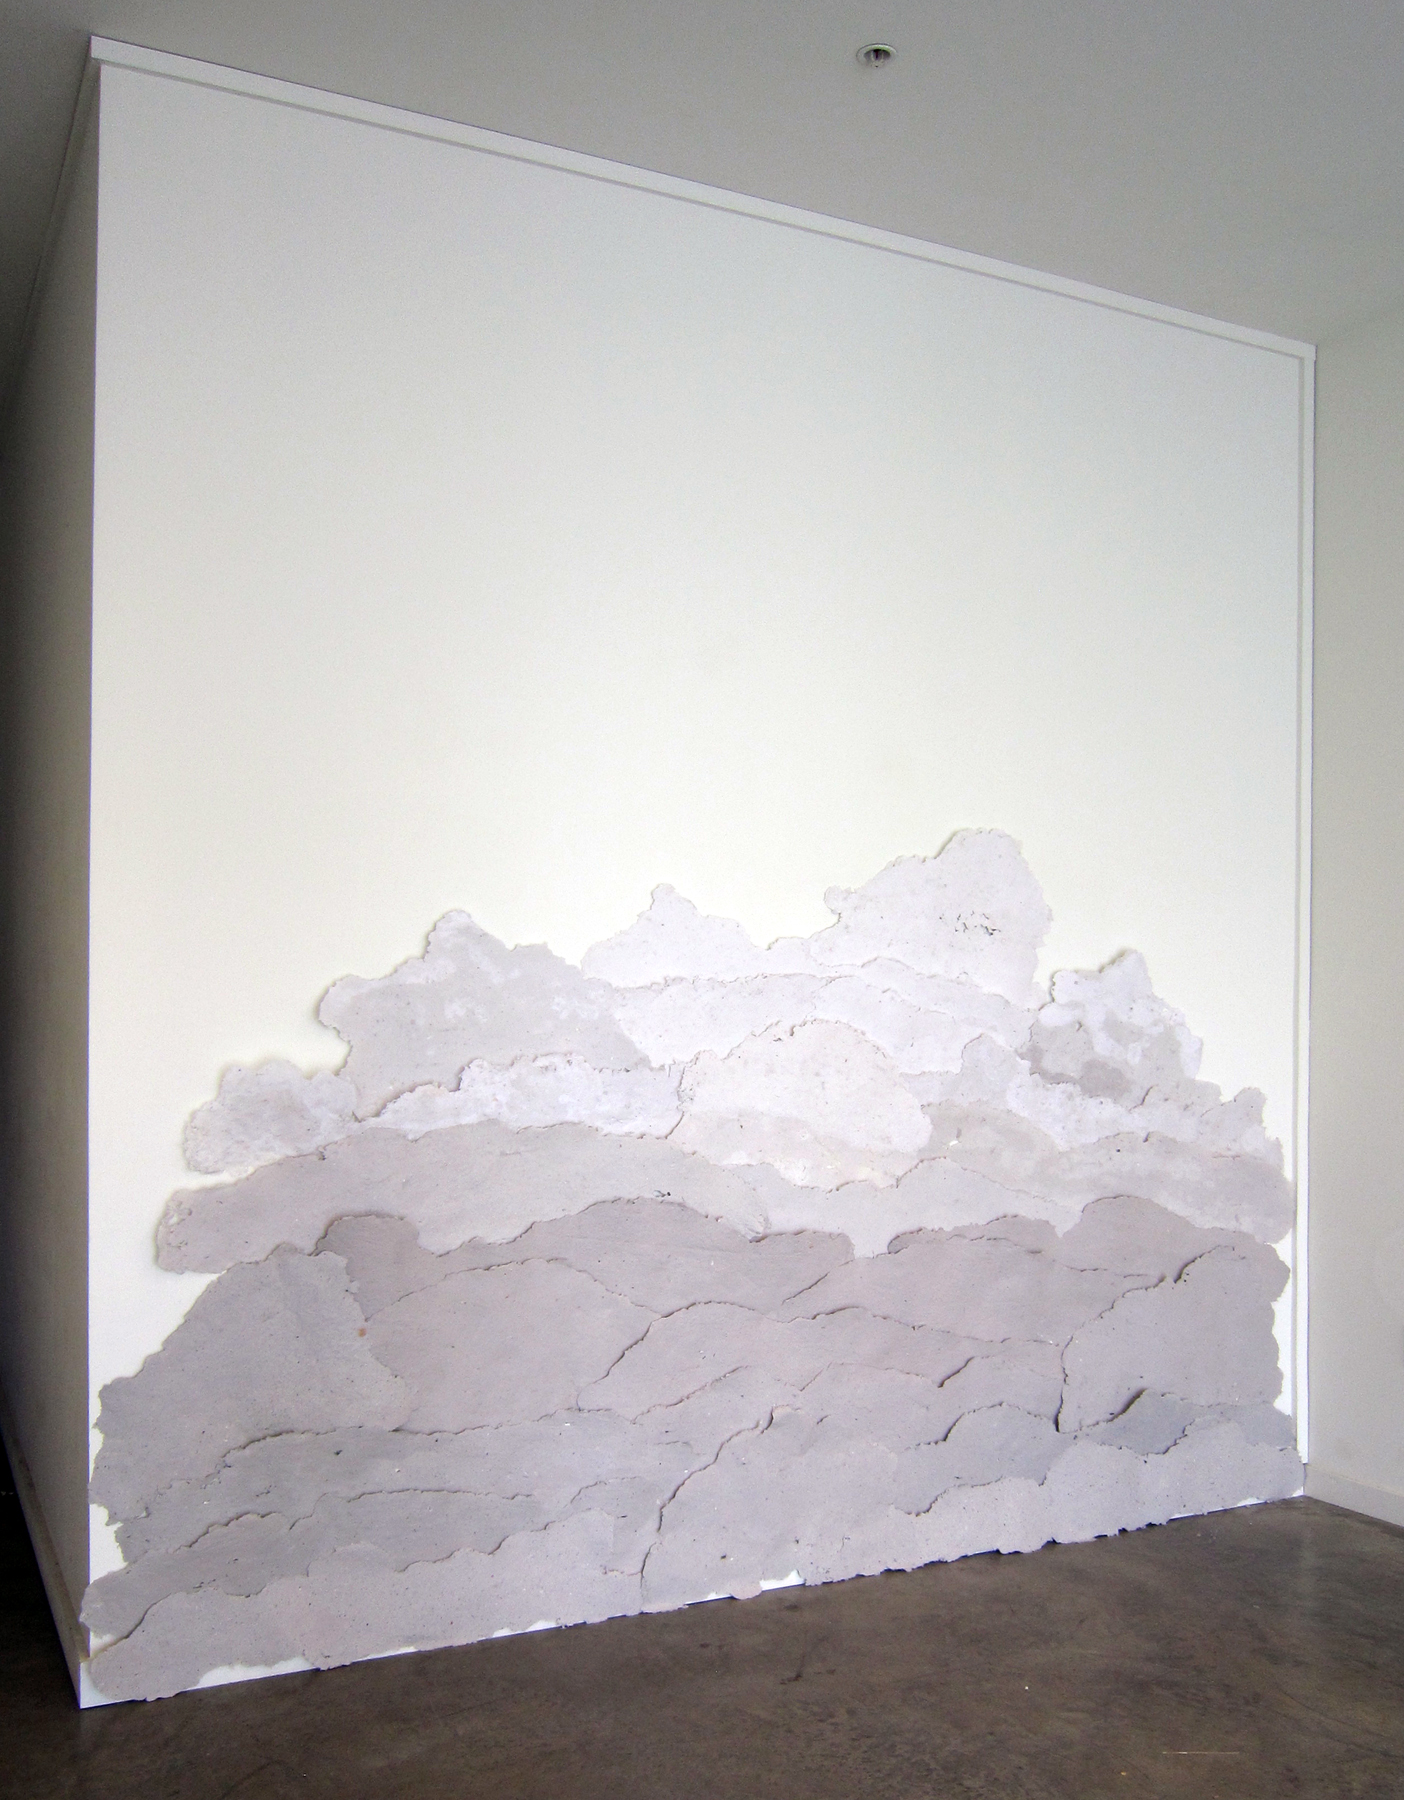   MOLLY SMITH   Mist,&nbsp; 2013, handmade, repurposed paper and nails, 120" x 72" 